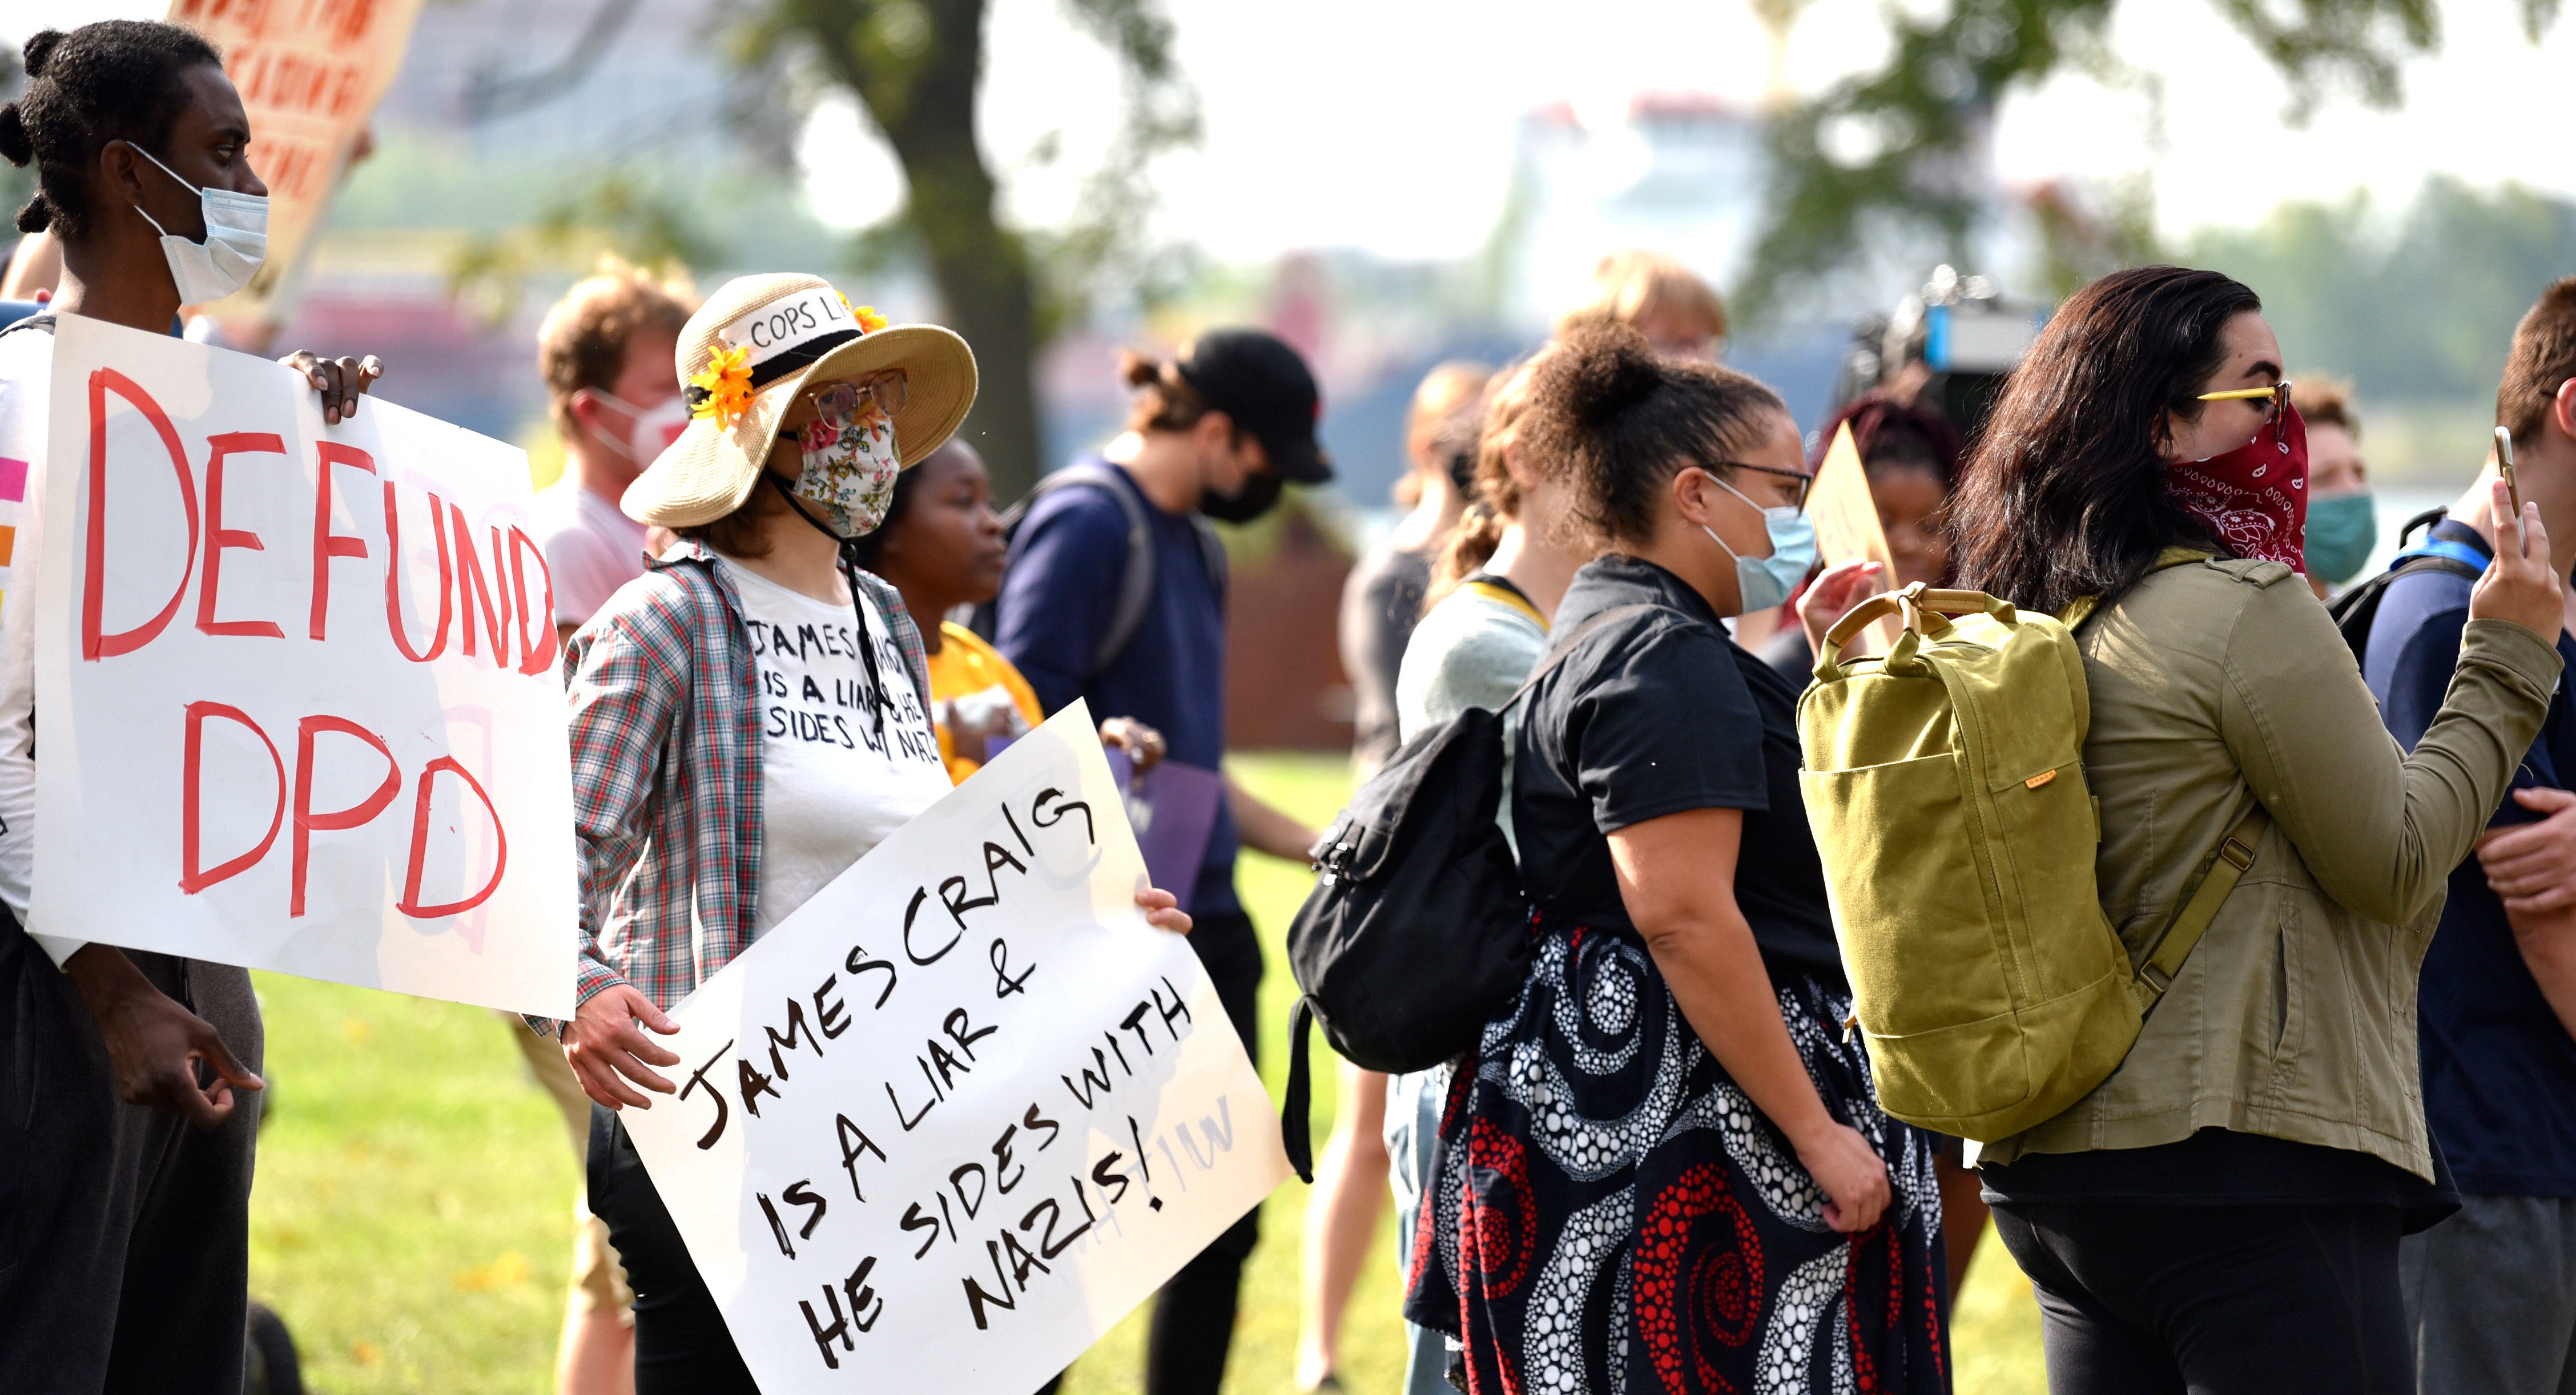 Members of Detroit Will Breathe and others protest before the arrival of former DPD Chief James Craig, Tuesday morning, September 14, 2021.